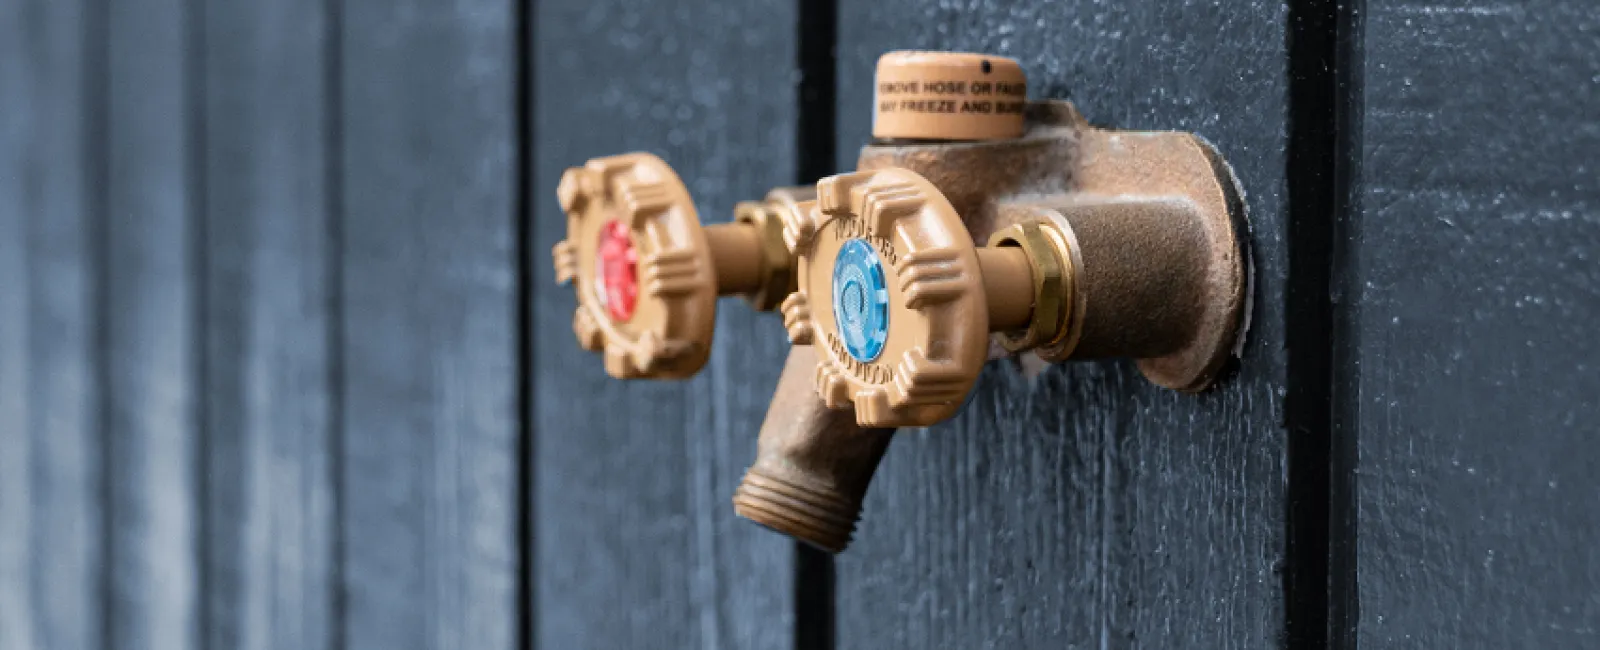 How to Fix an Outdoor Faucet